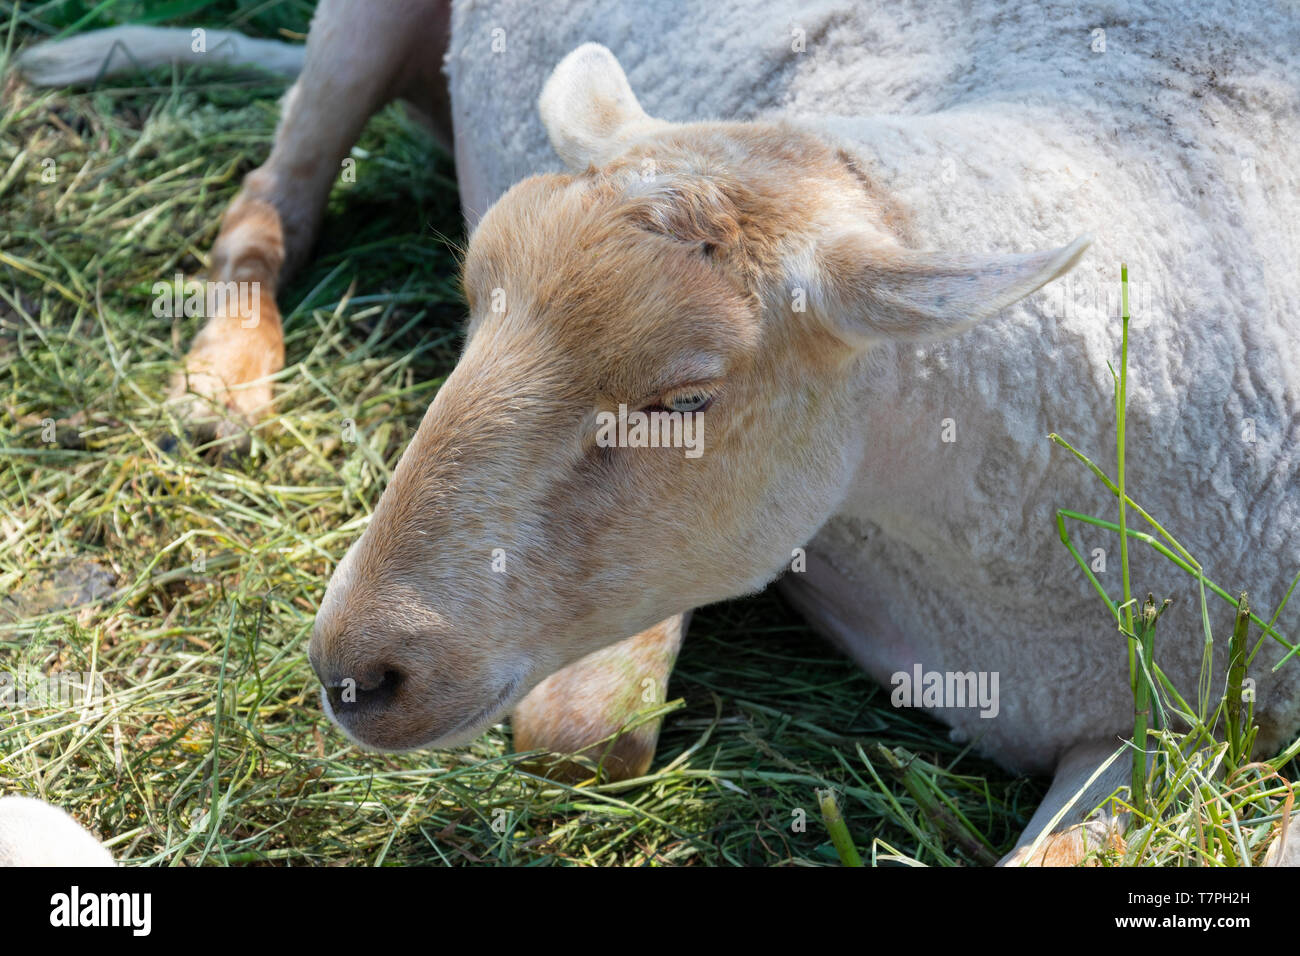 shaved sheep rest in the green grass Stock Photo